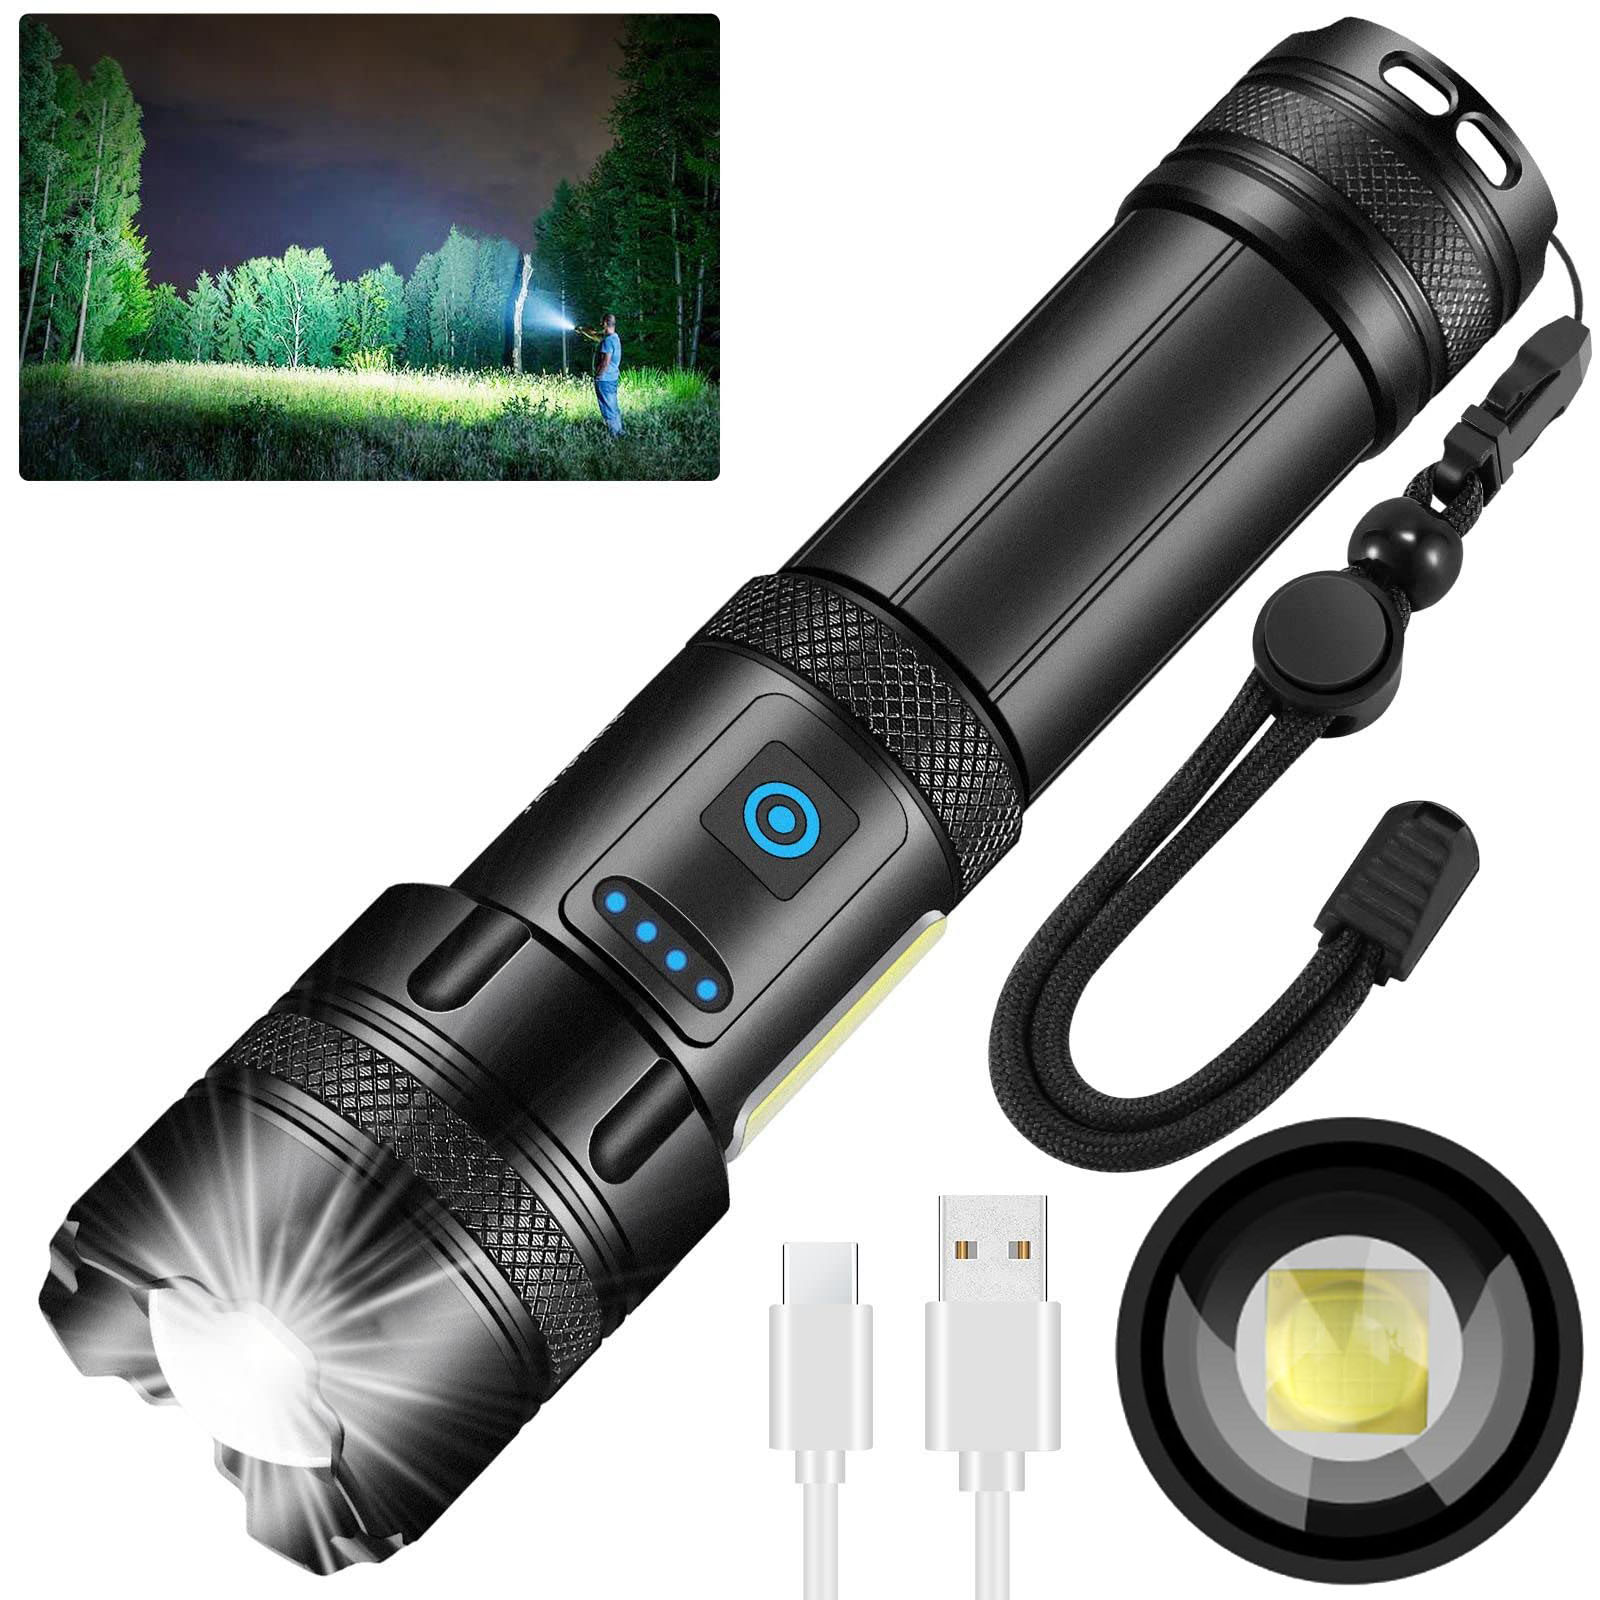 2023 New Year Limited Time Sale 70% OFF🎉LED Rechargeable Tactical Laser Flashlight 90000 High Lumens🔥Buy 2 Get Free Shipping